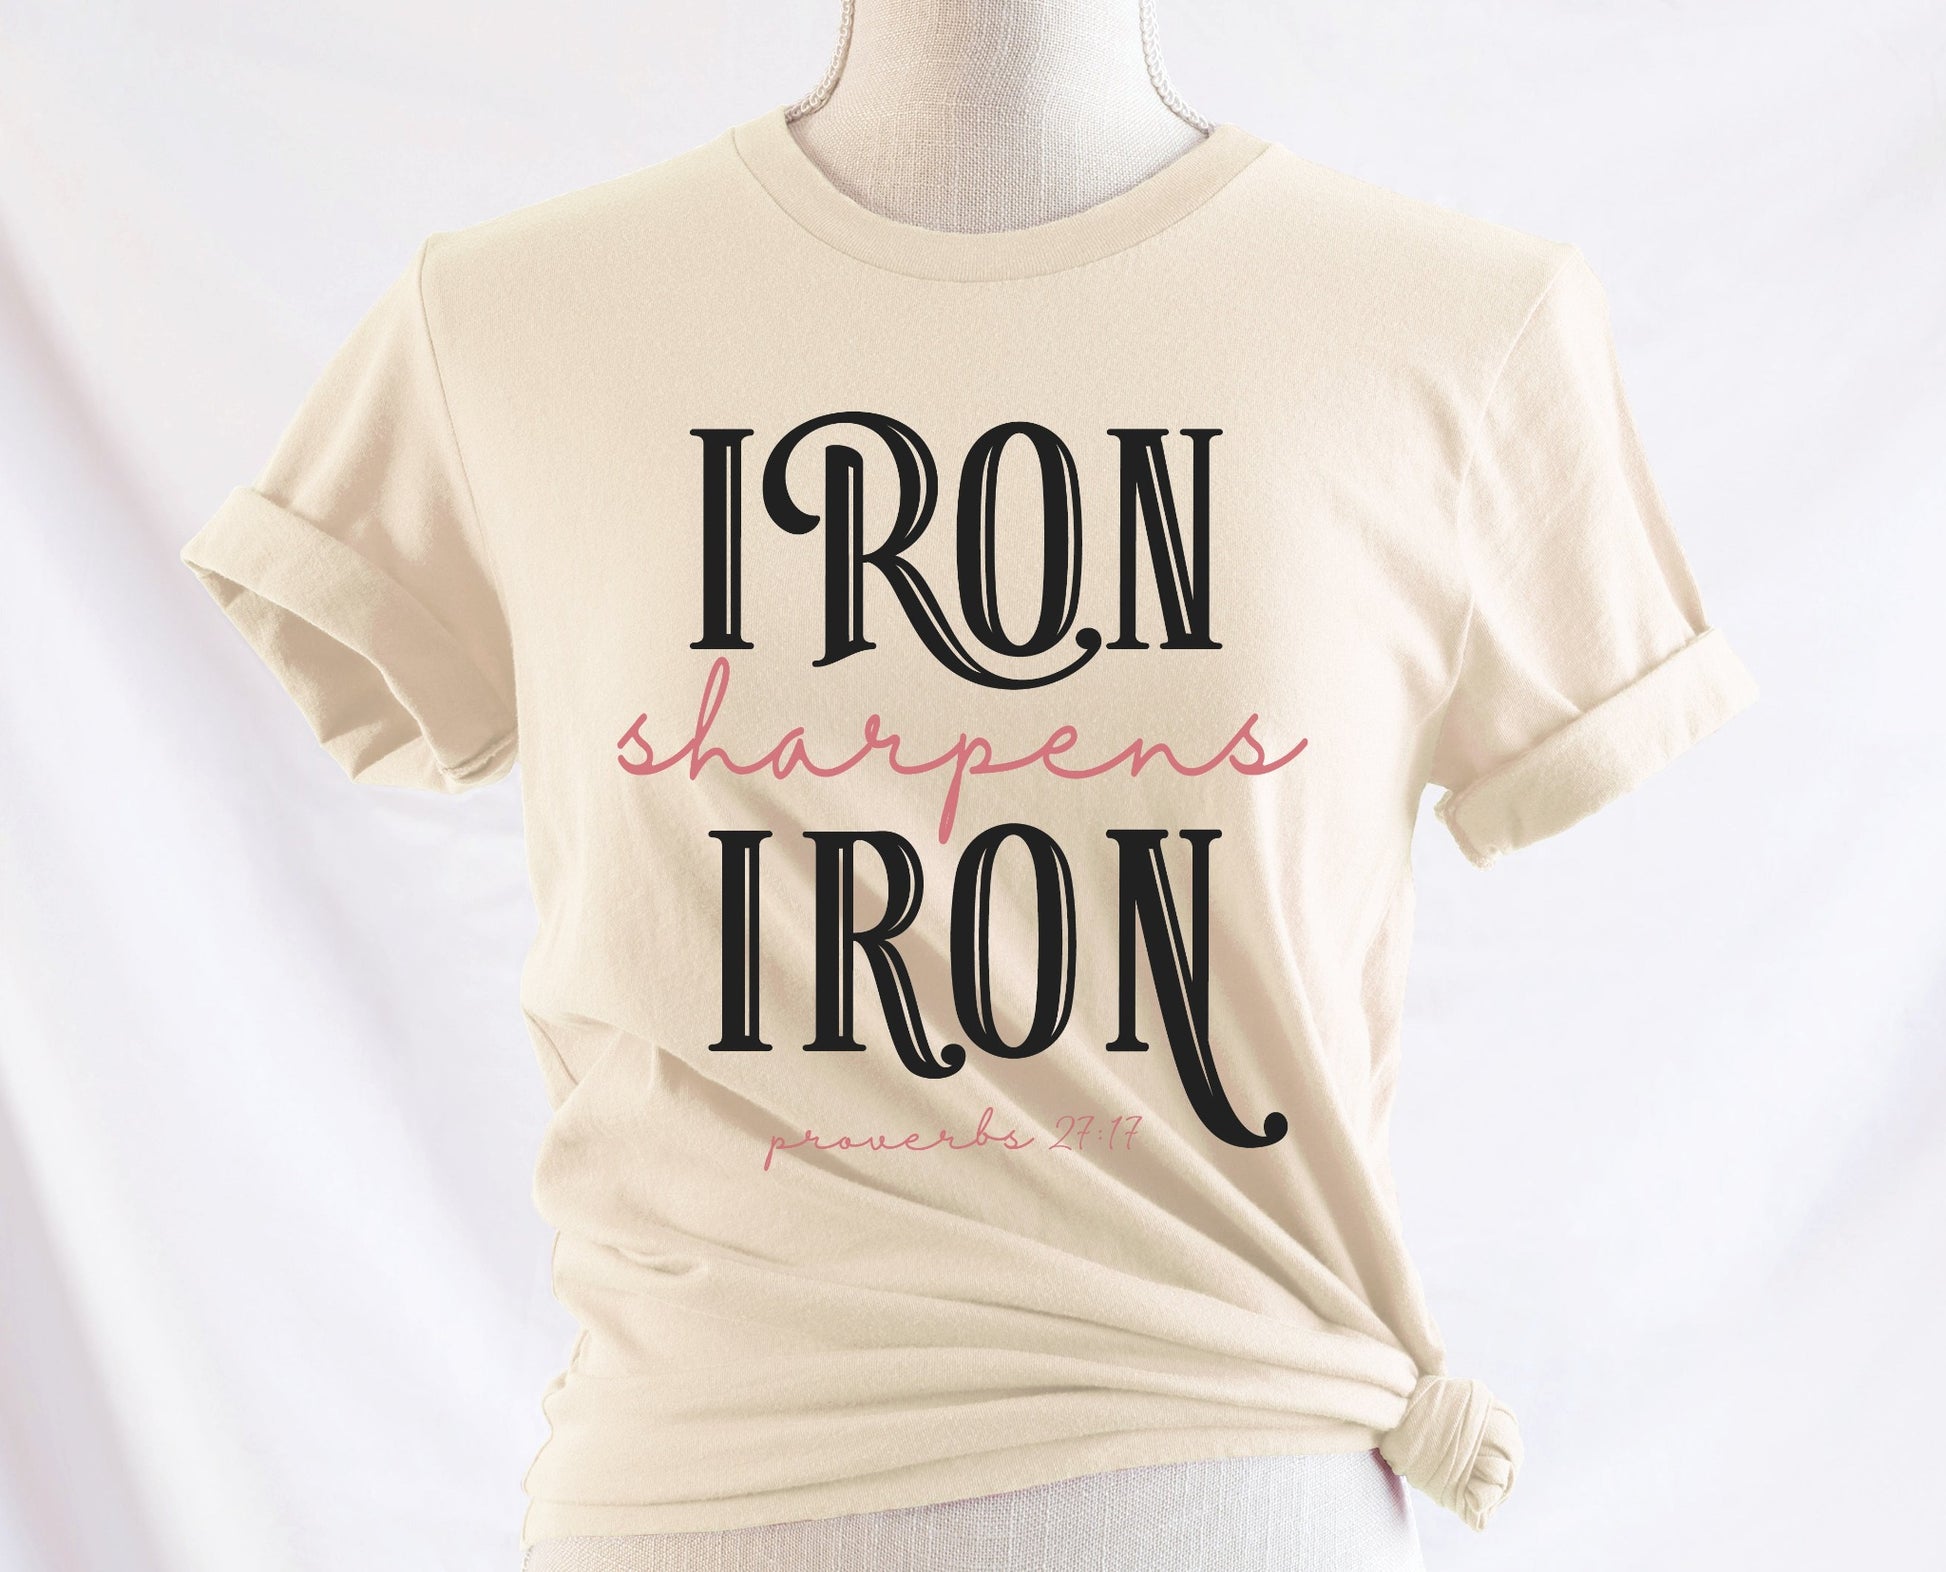 Iron Sharpens Iron Proverbs 27:17 Christian aesthetic design printed in black and mauve on ladies soft cream unisex t-shirt for women's groups